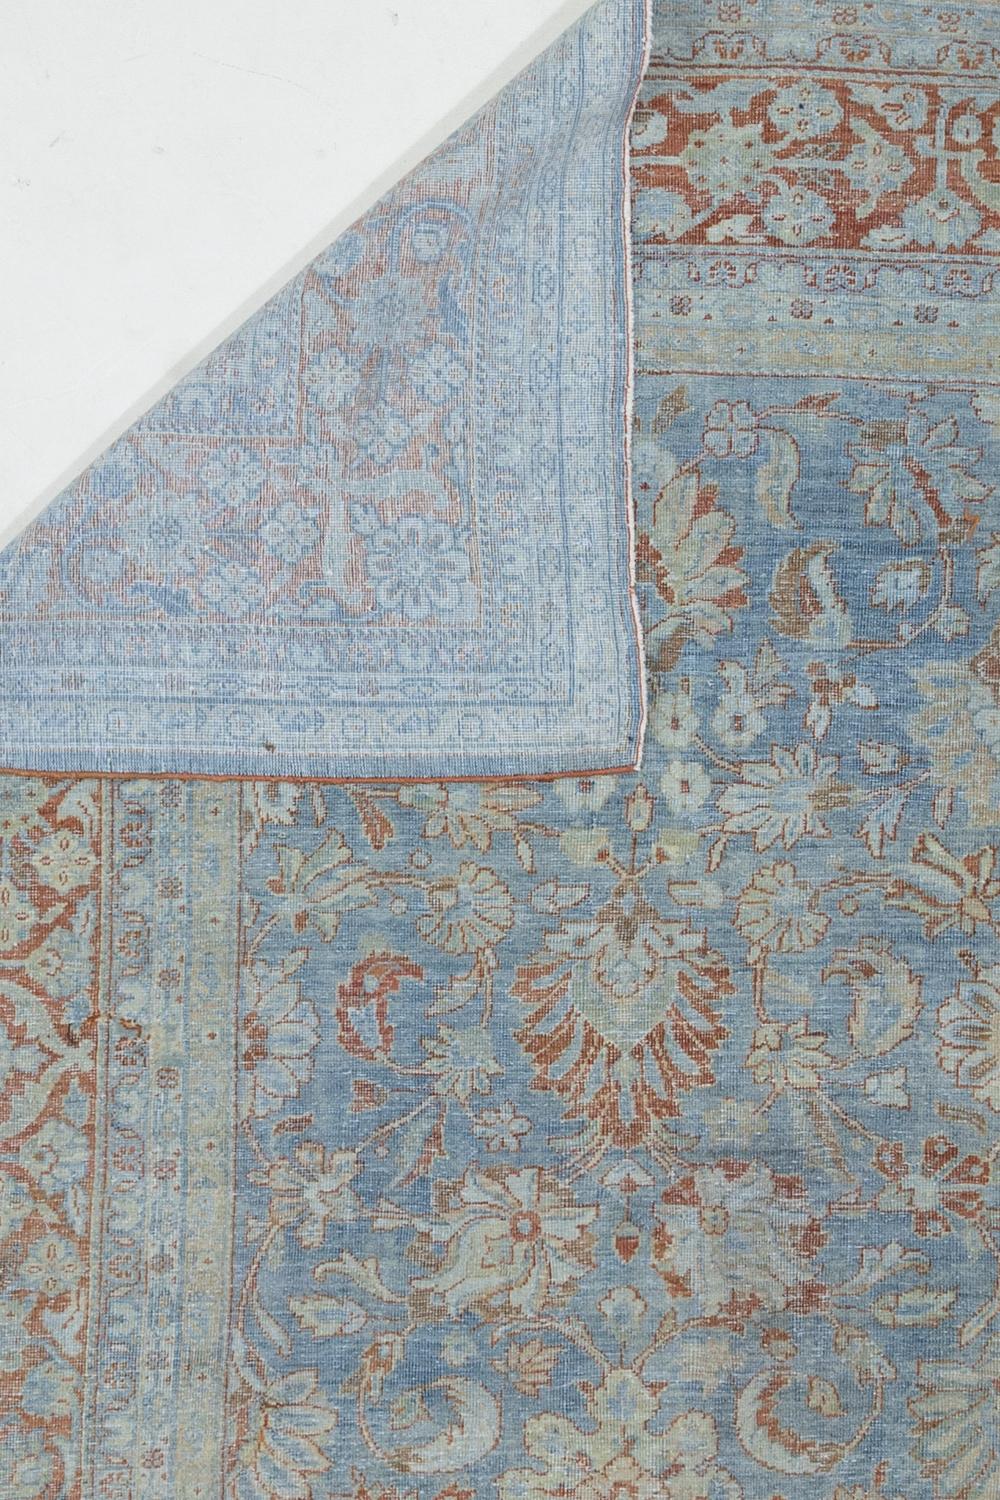 Antique Persian Mahal Rug In Good Condition For Sale In West Palm Beach, FL